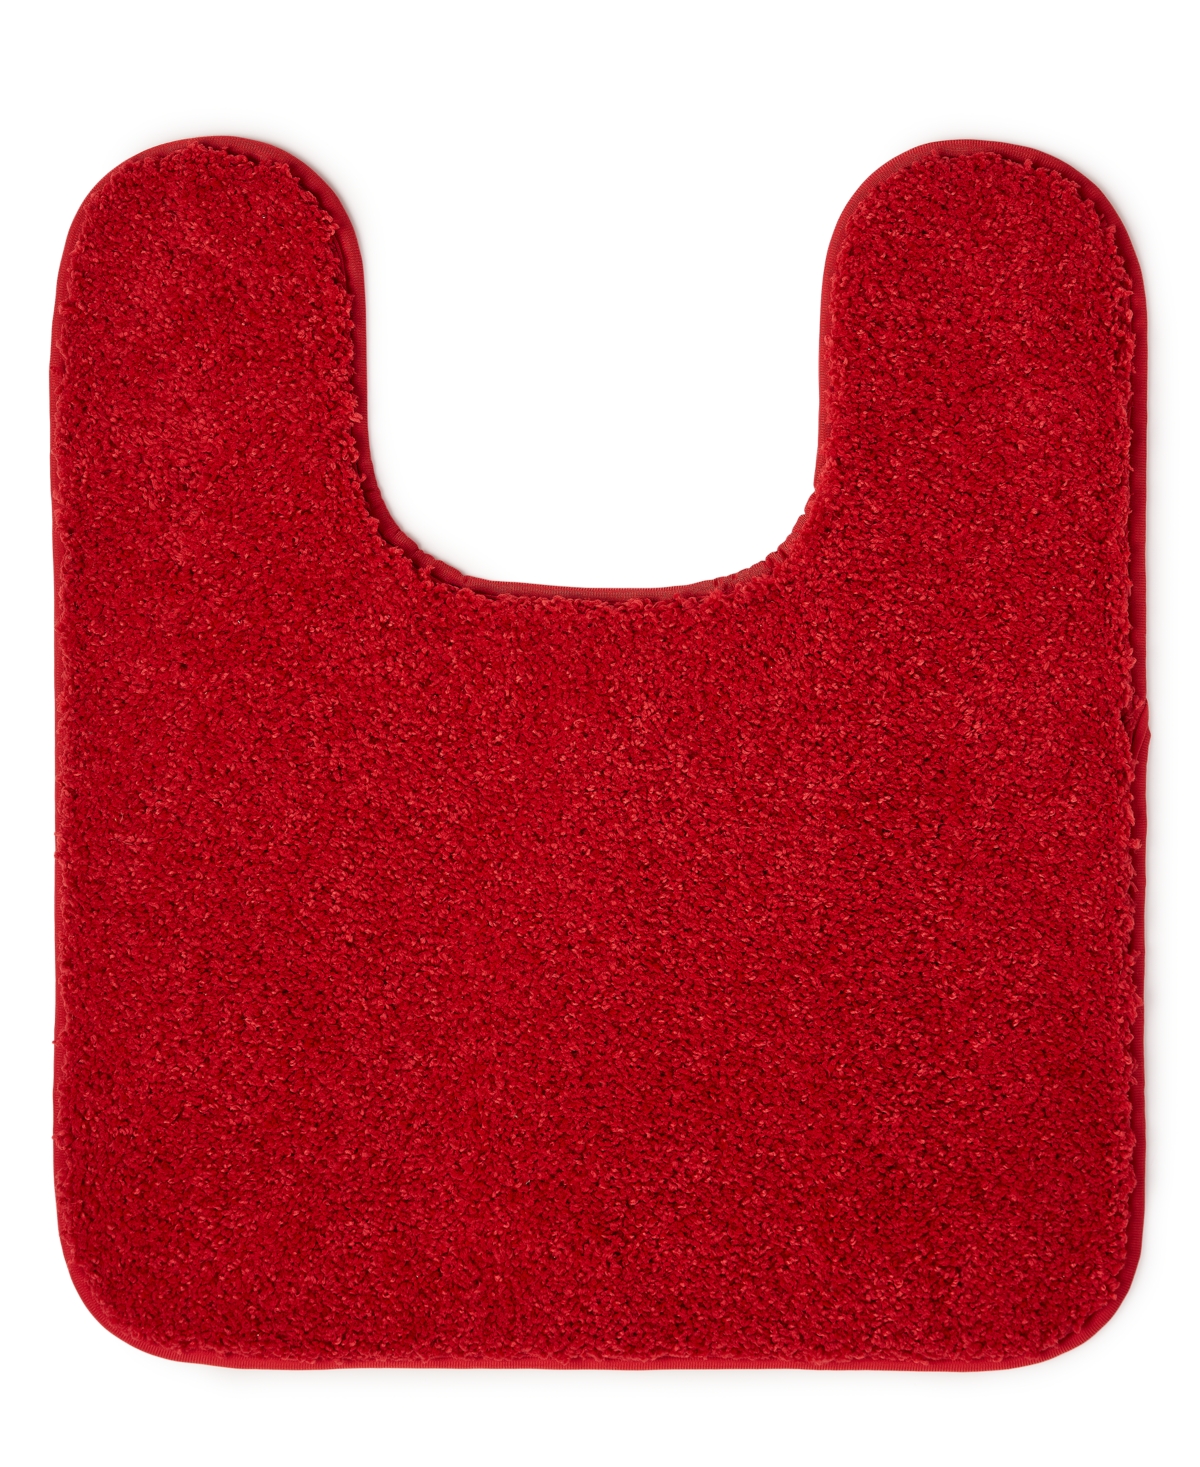 Charter Club Elite Contour Bath Rug, Created For Macy's In Red Currant